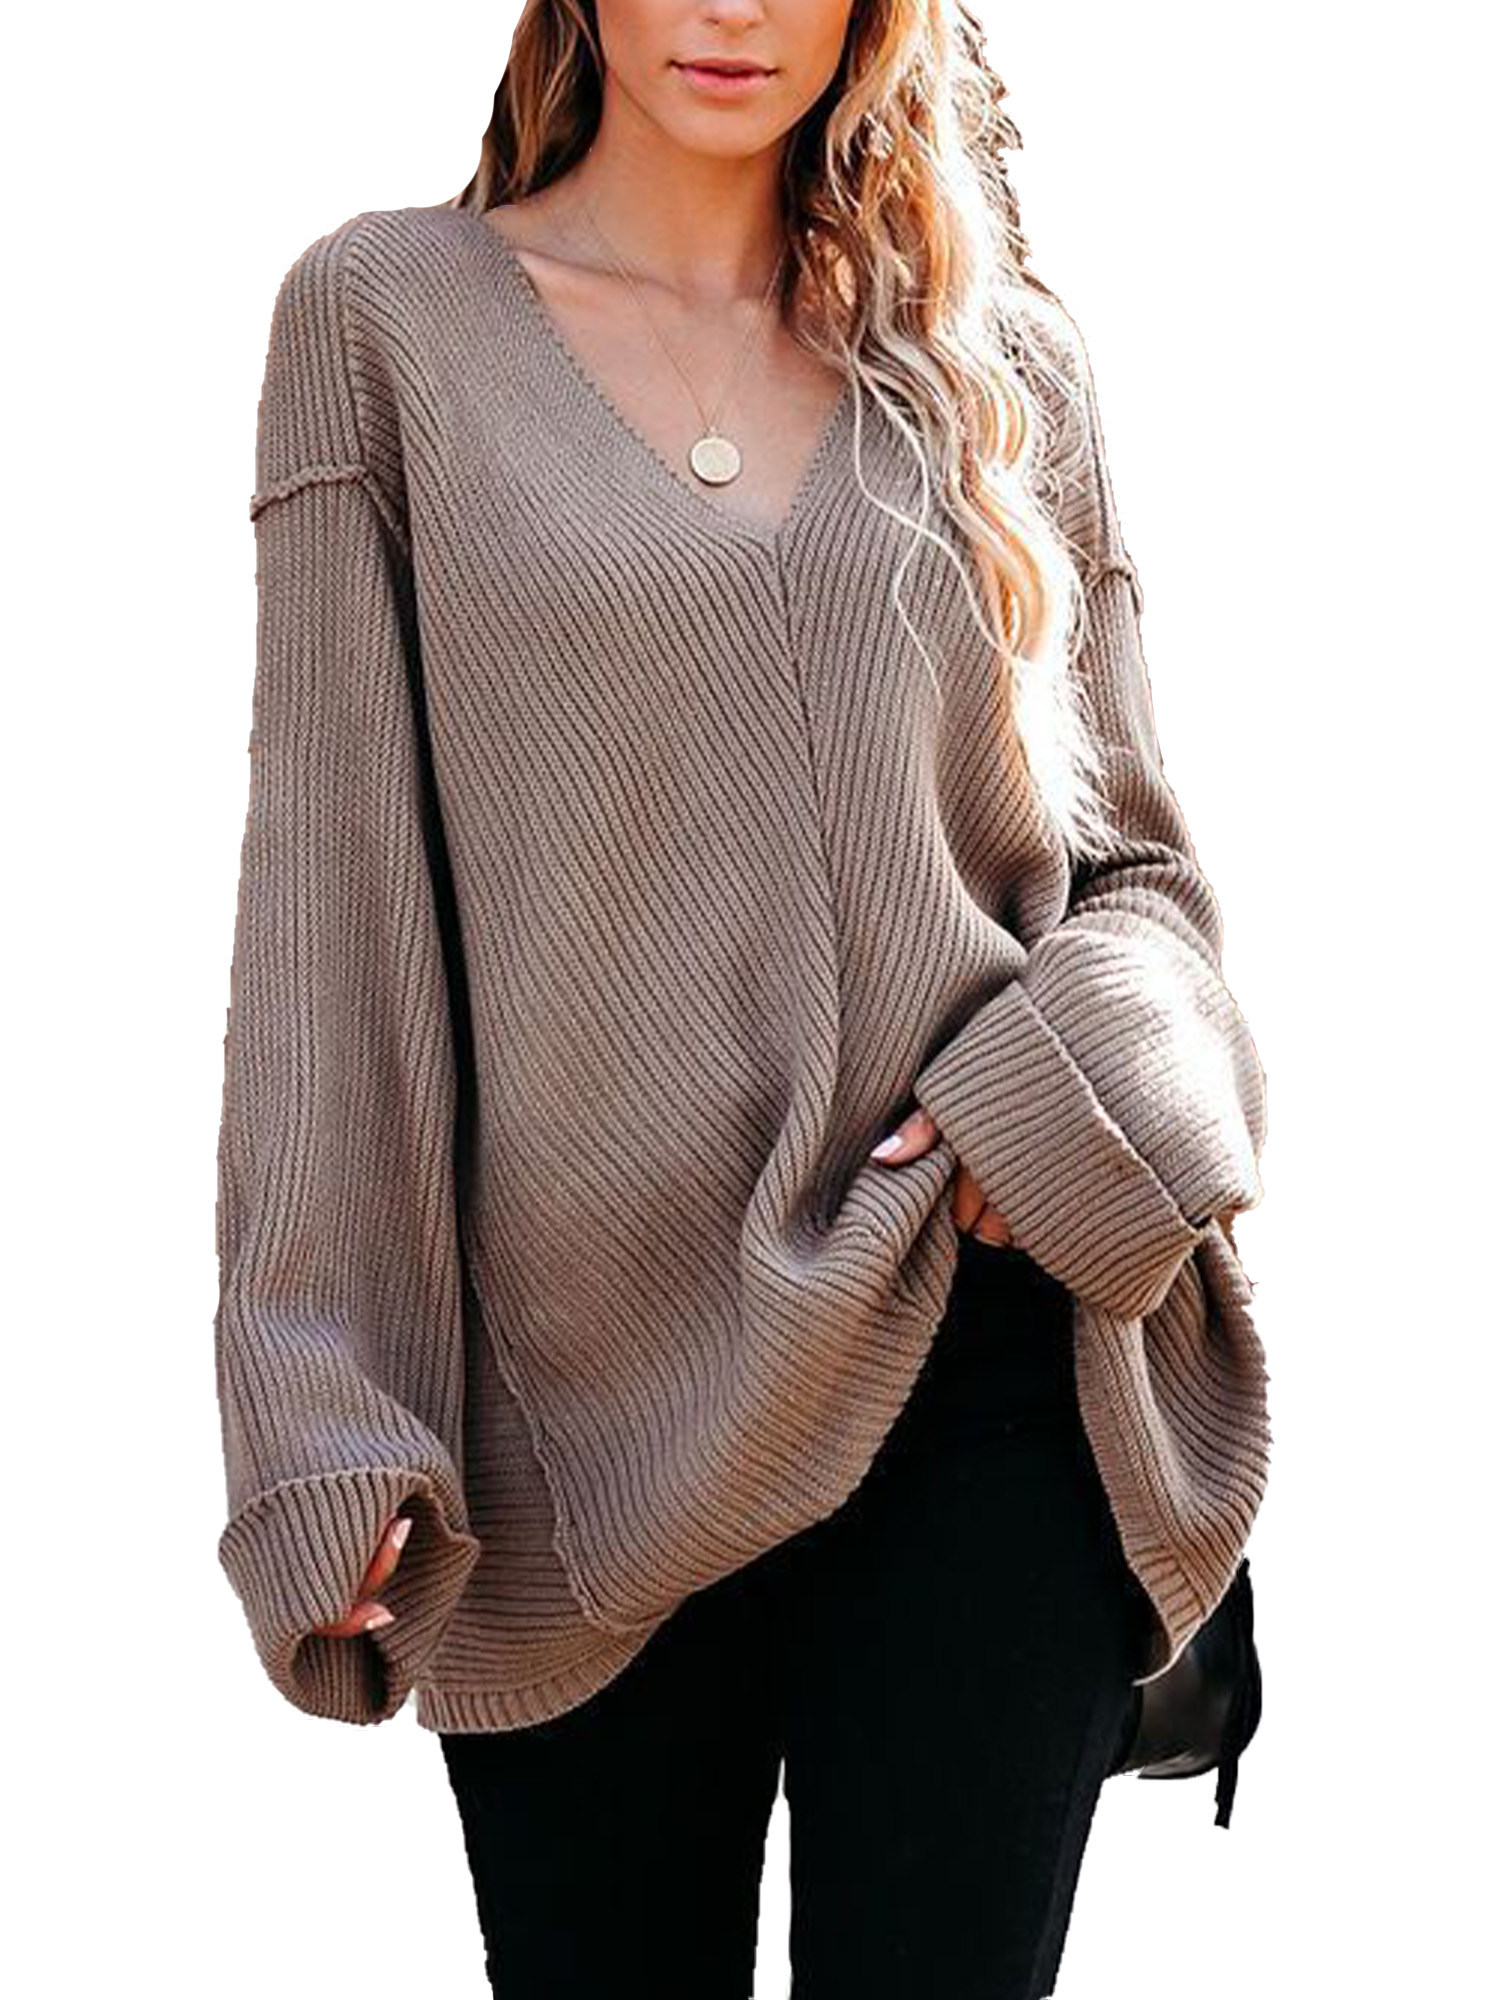 Woman's Ladies Knitted Oversized Pocket Baggy Jumper Cape Cardigan Top 8-22 